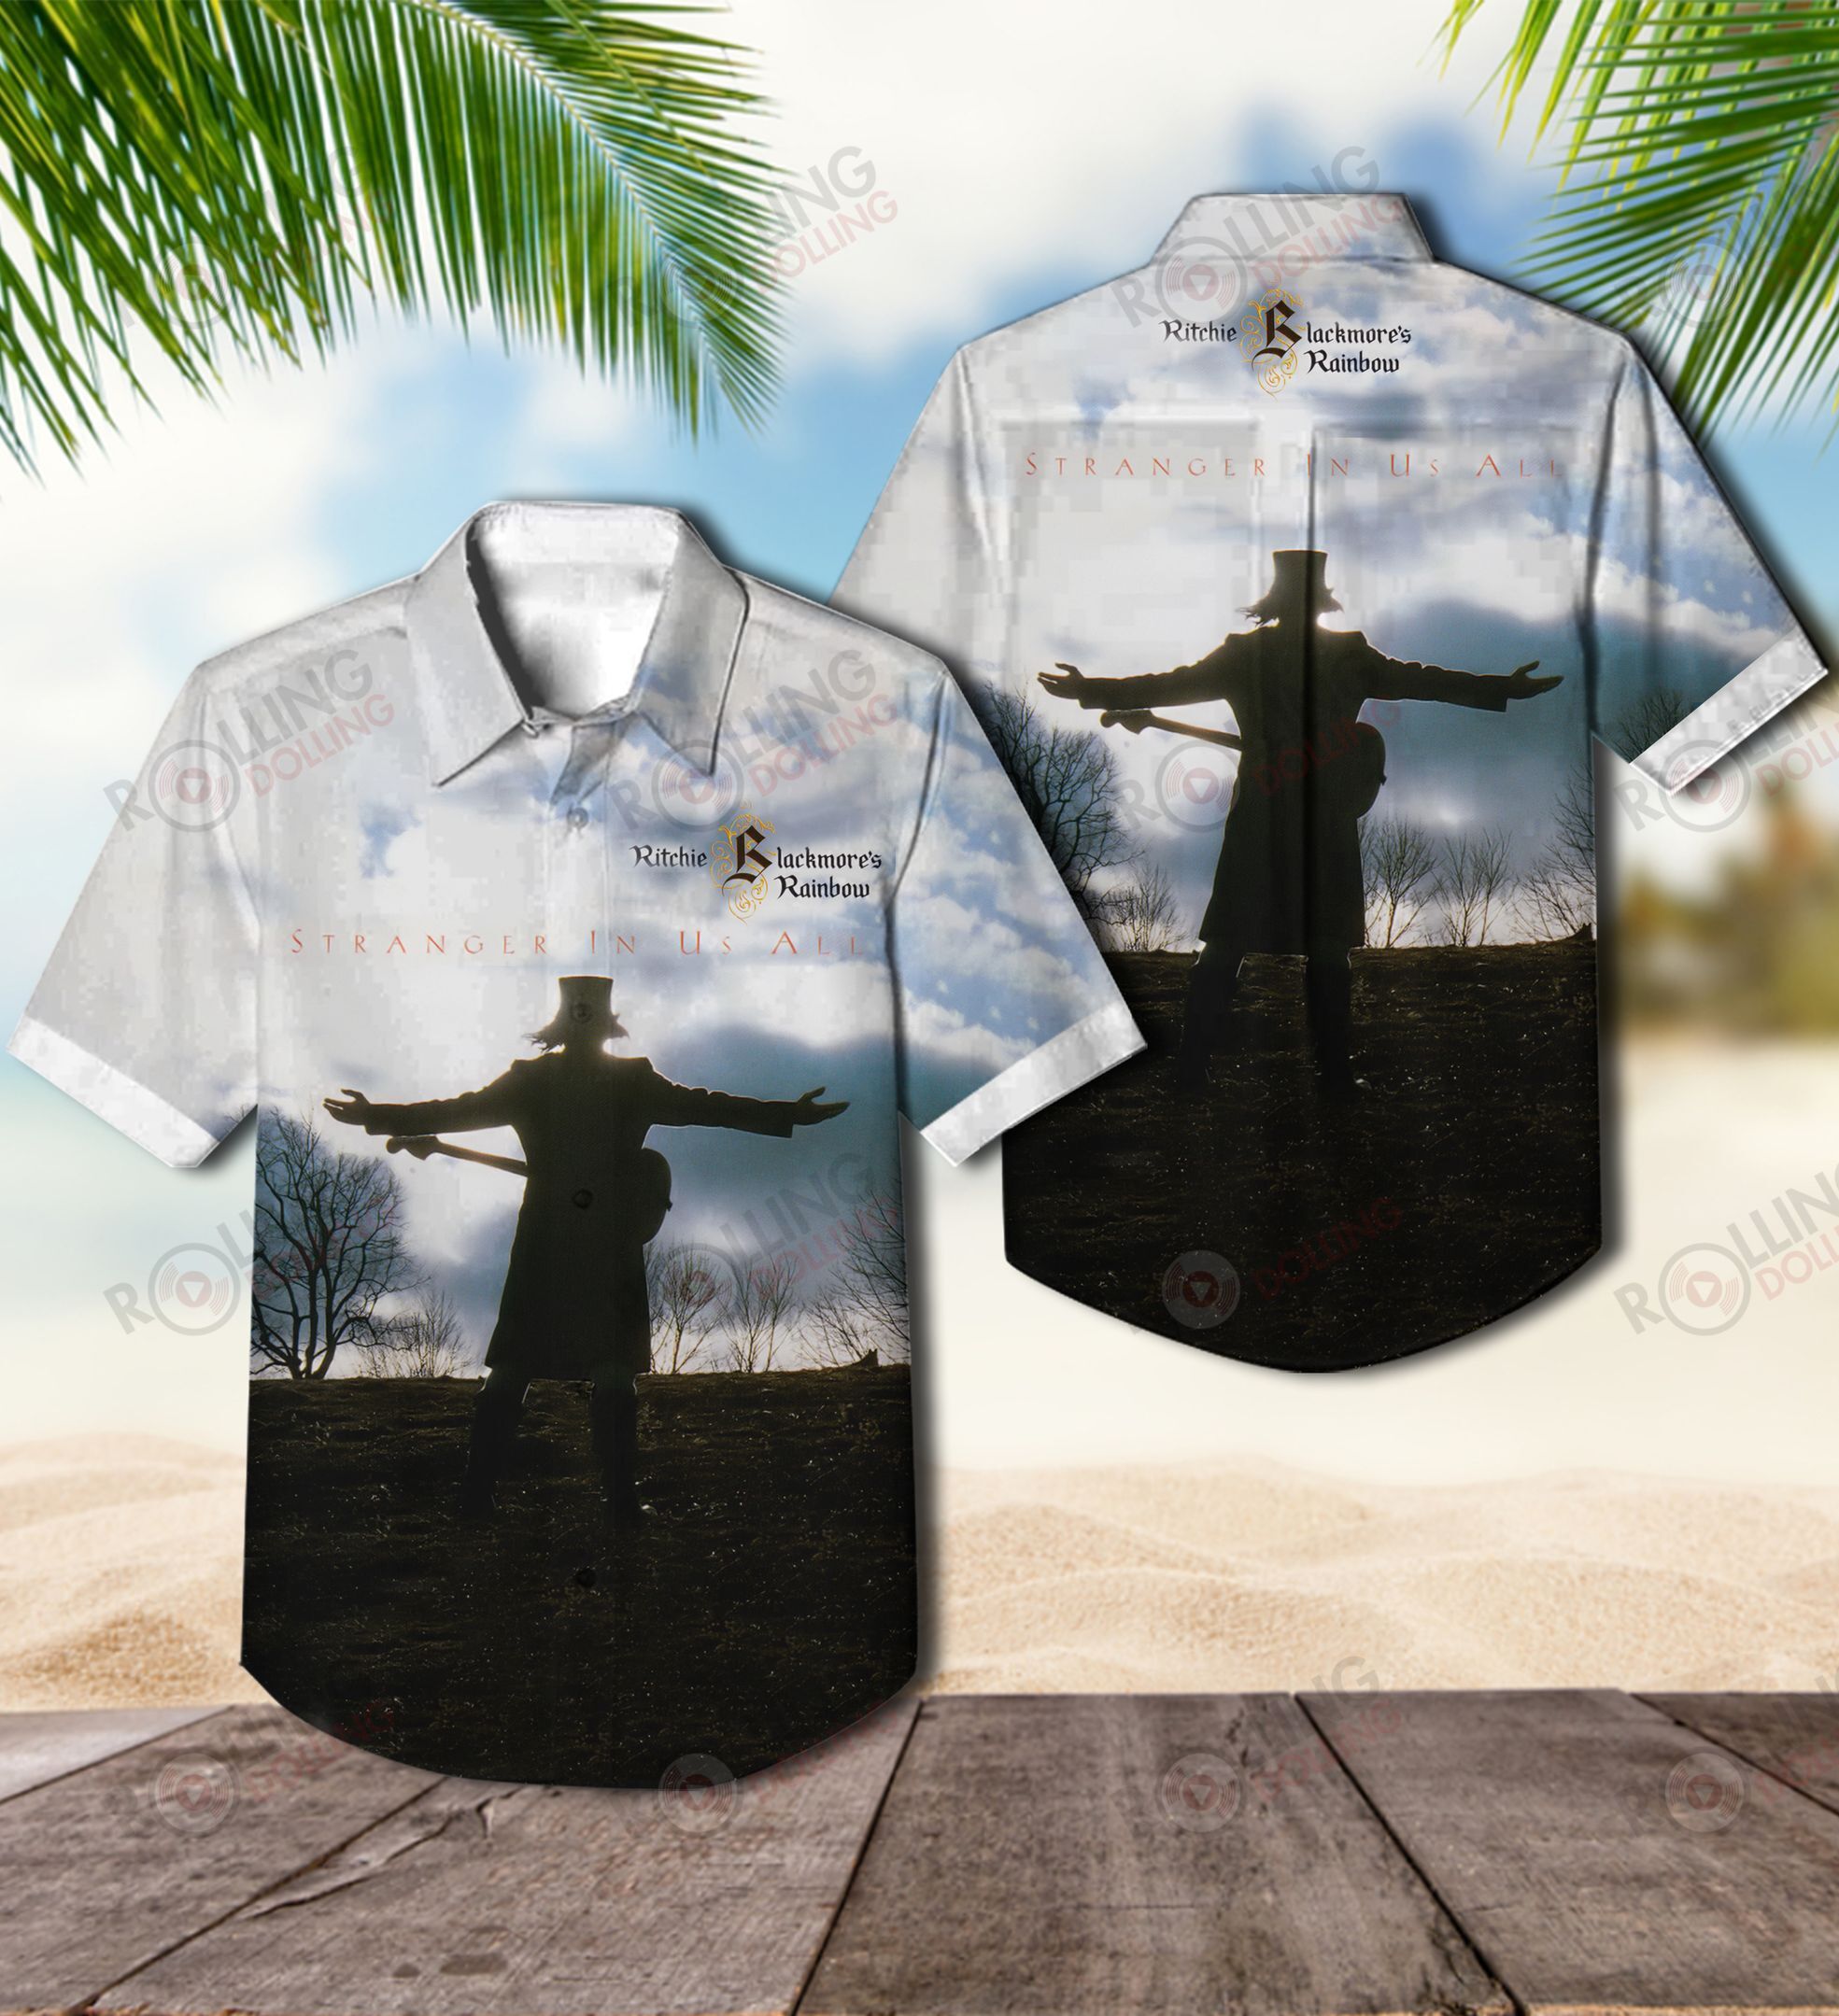 This would make a great gift for any fan who loves Hawaiian Shirt as well as Rock band 7